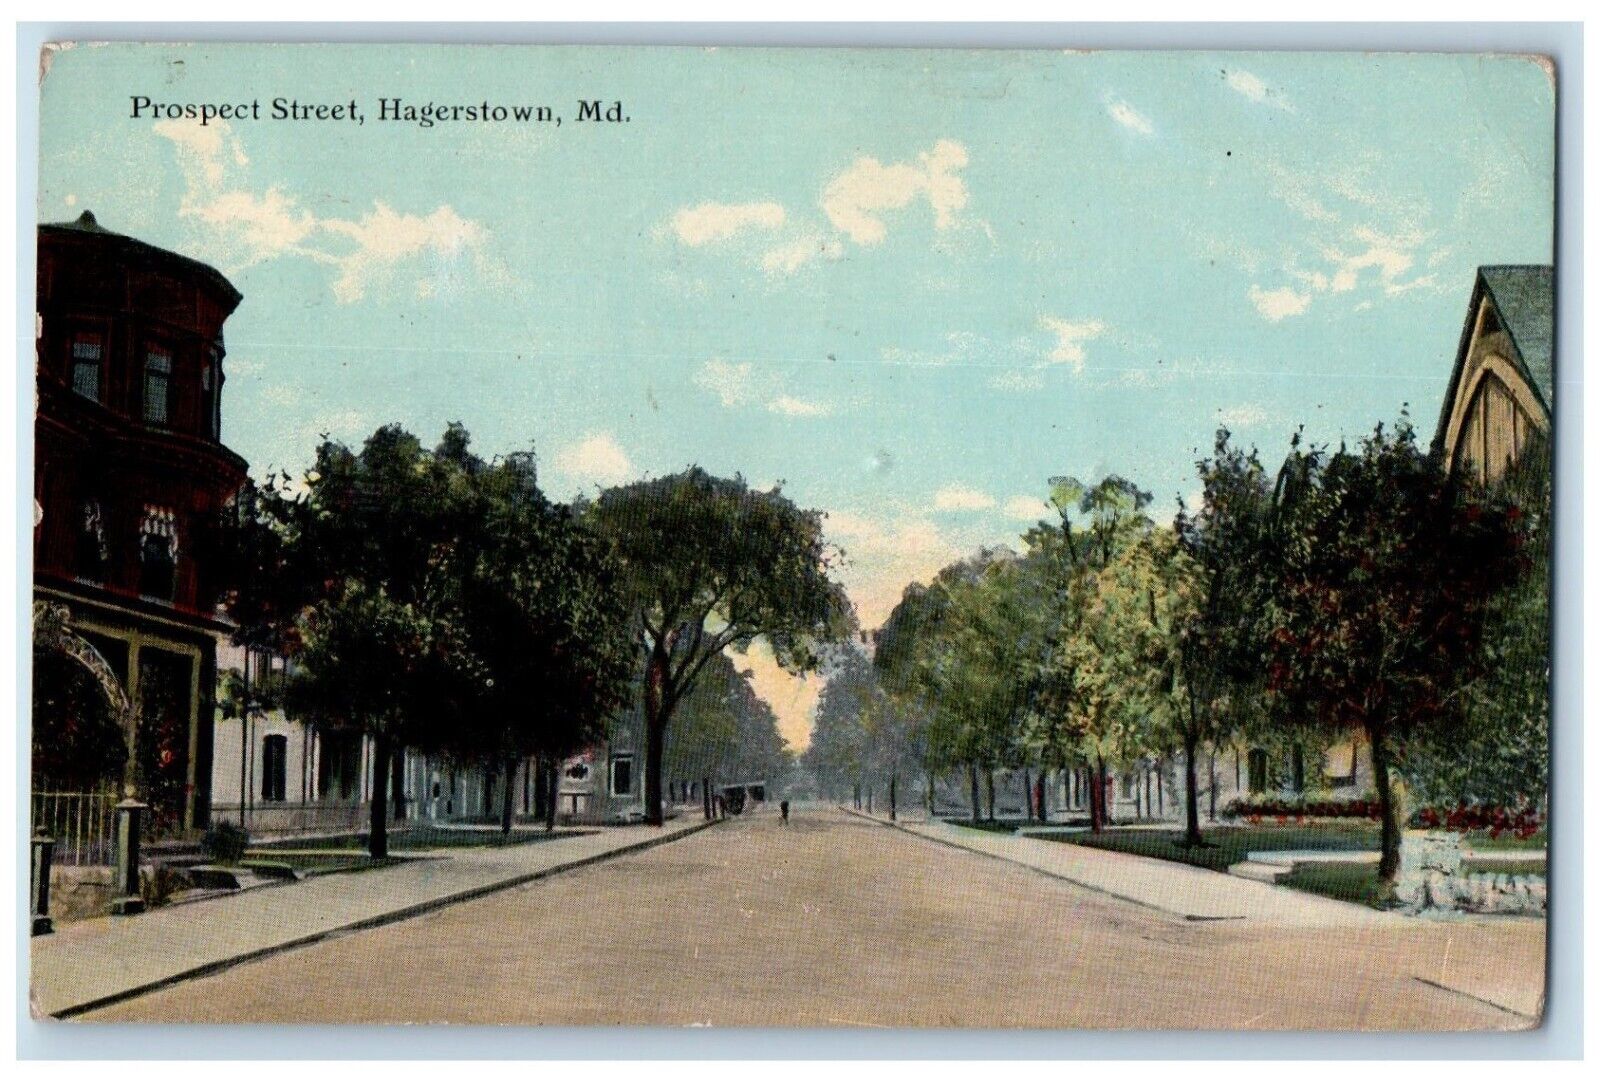 1912 Prospect Street Road Trees Hagerstown Maryland MD Antique Vintage Postcard